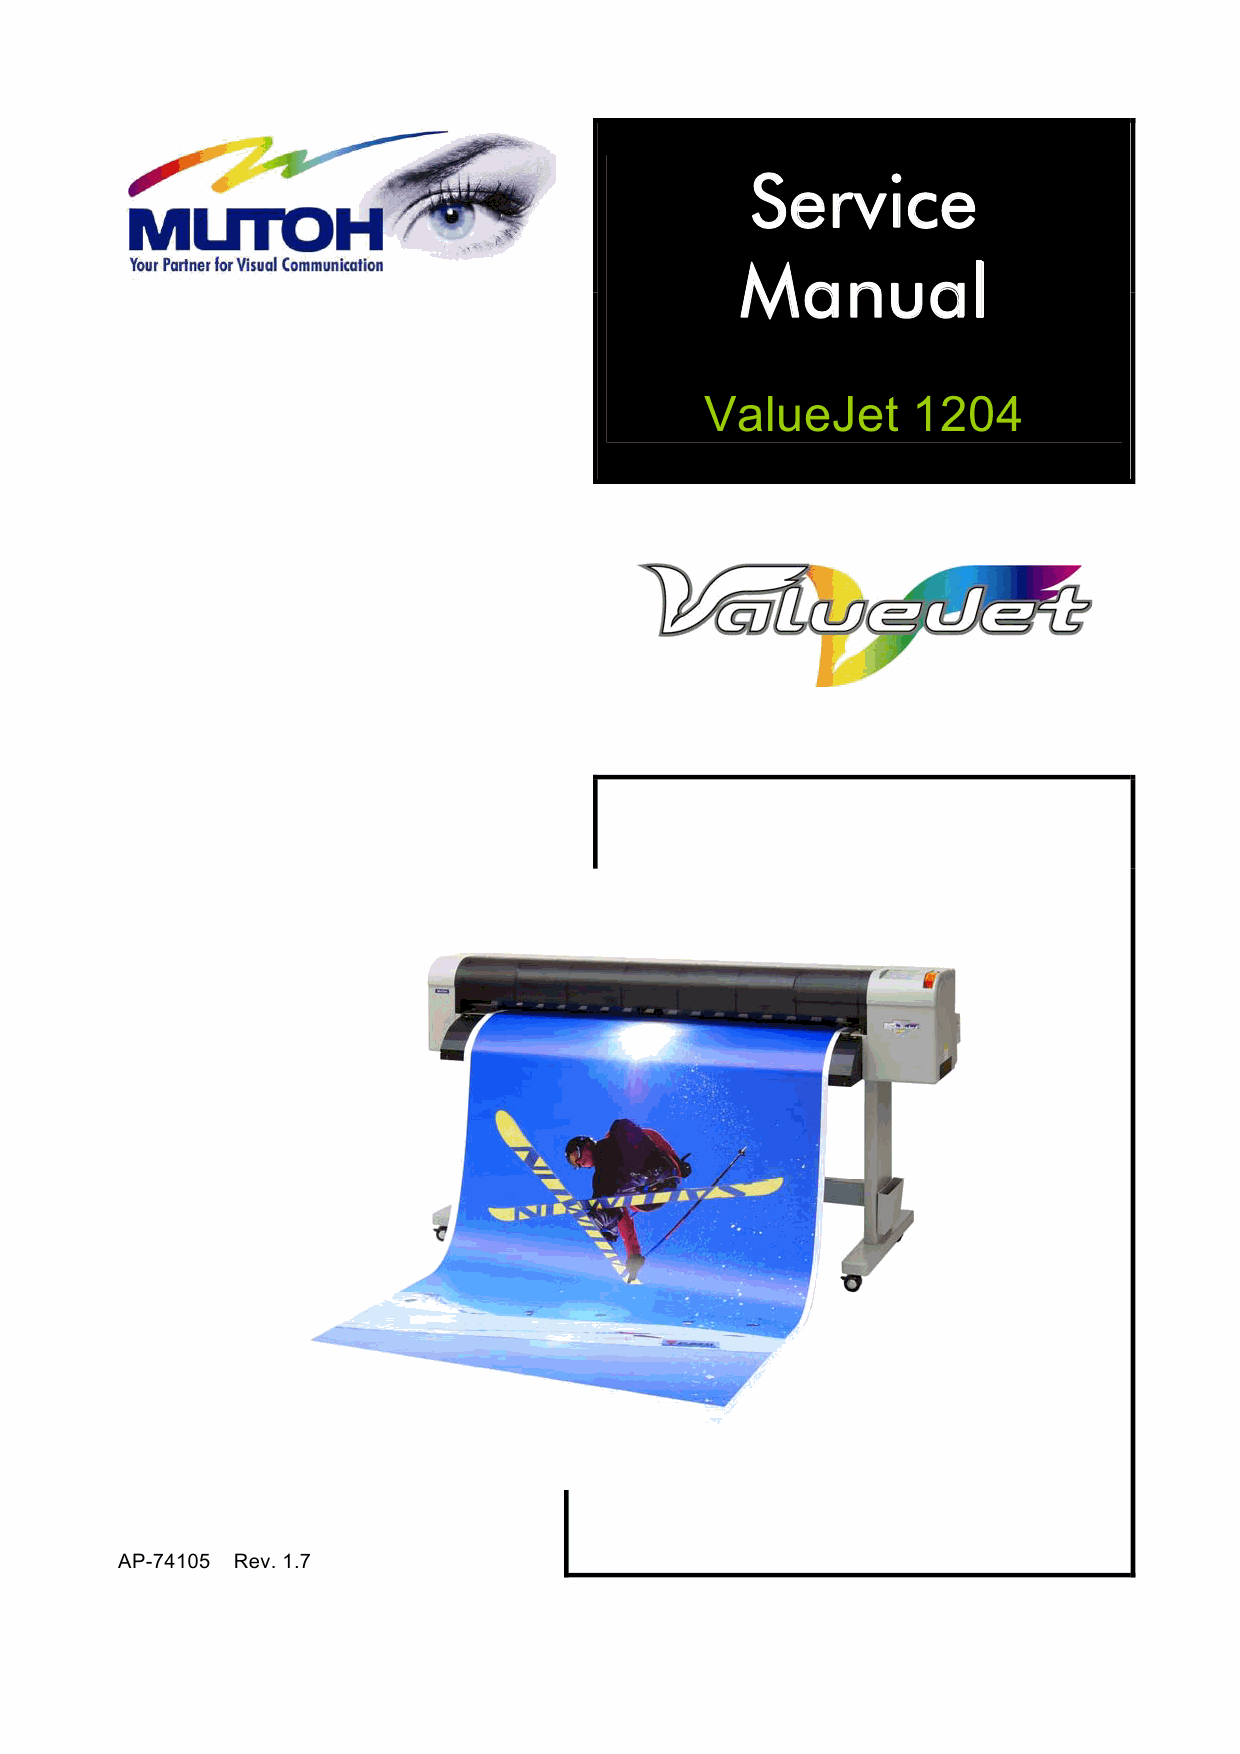 MUTOH ValueJet VJ 1204 Service and Parts Manual-1